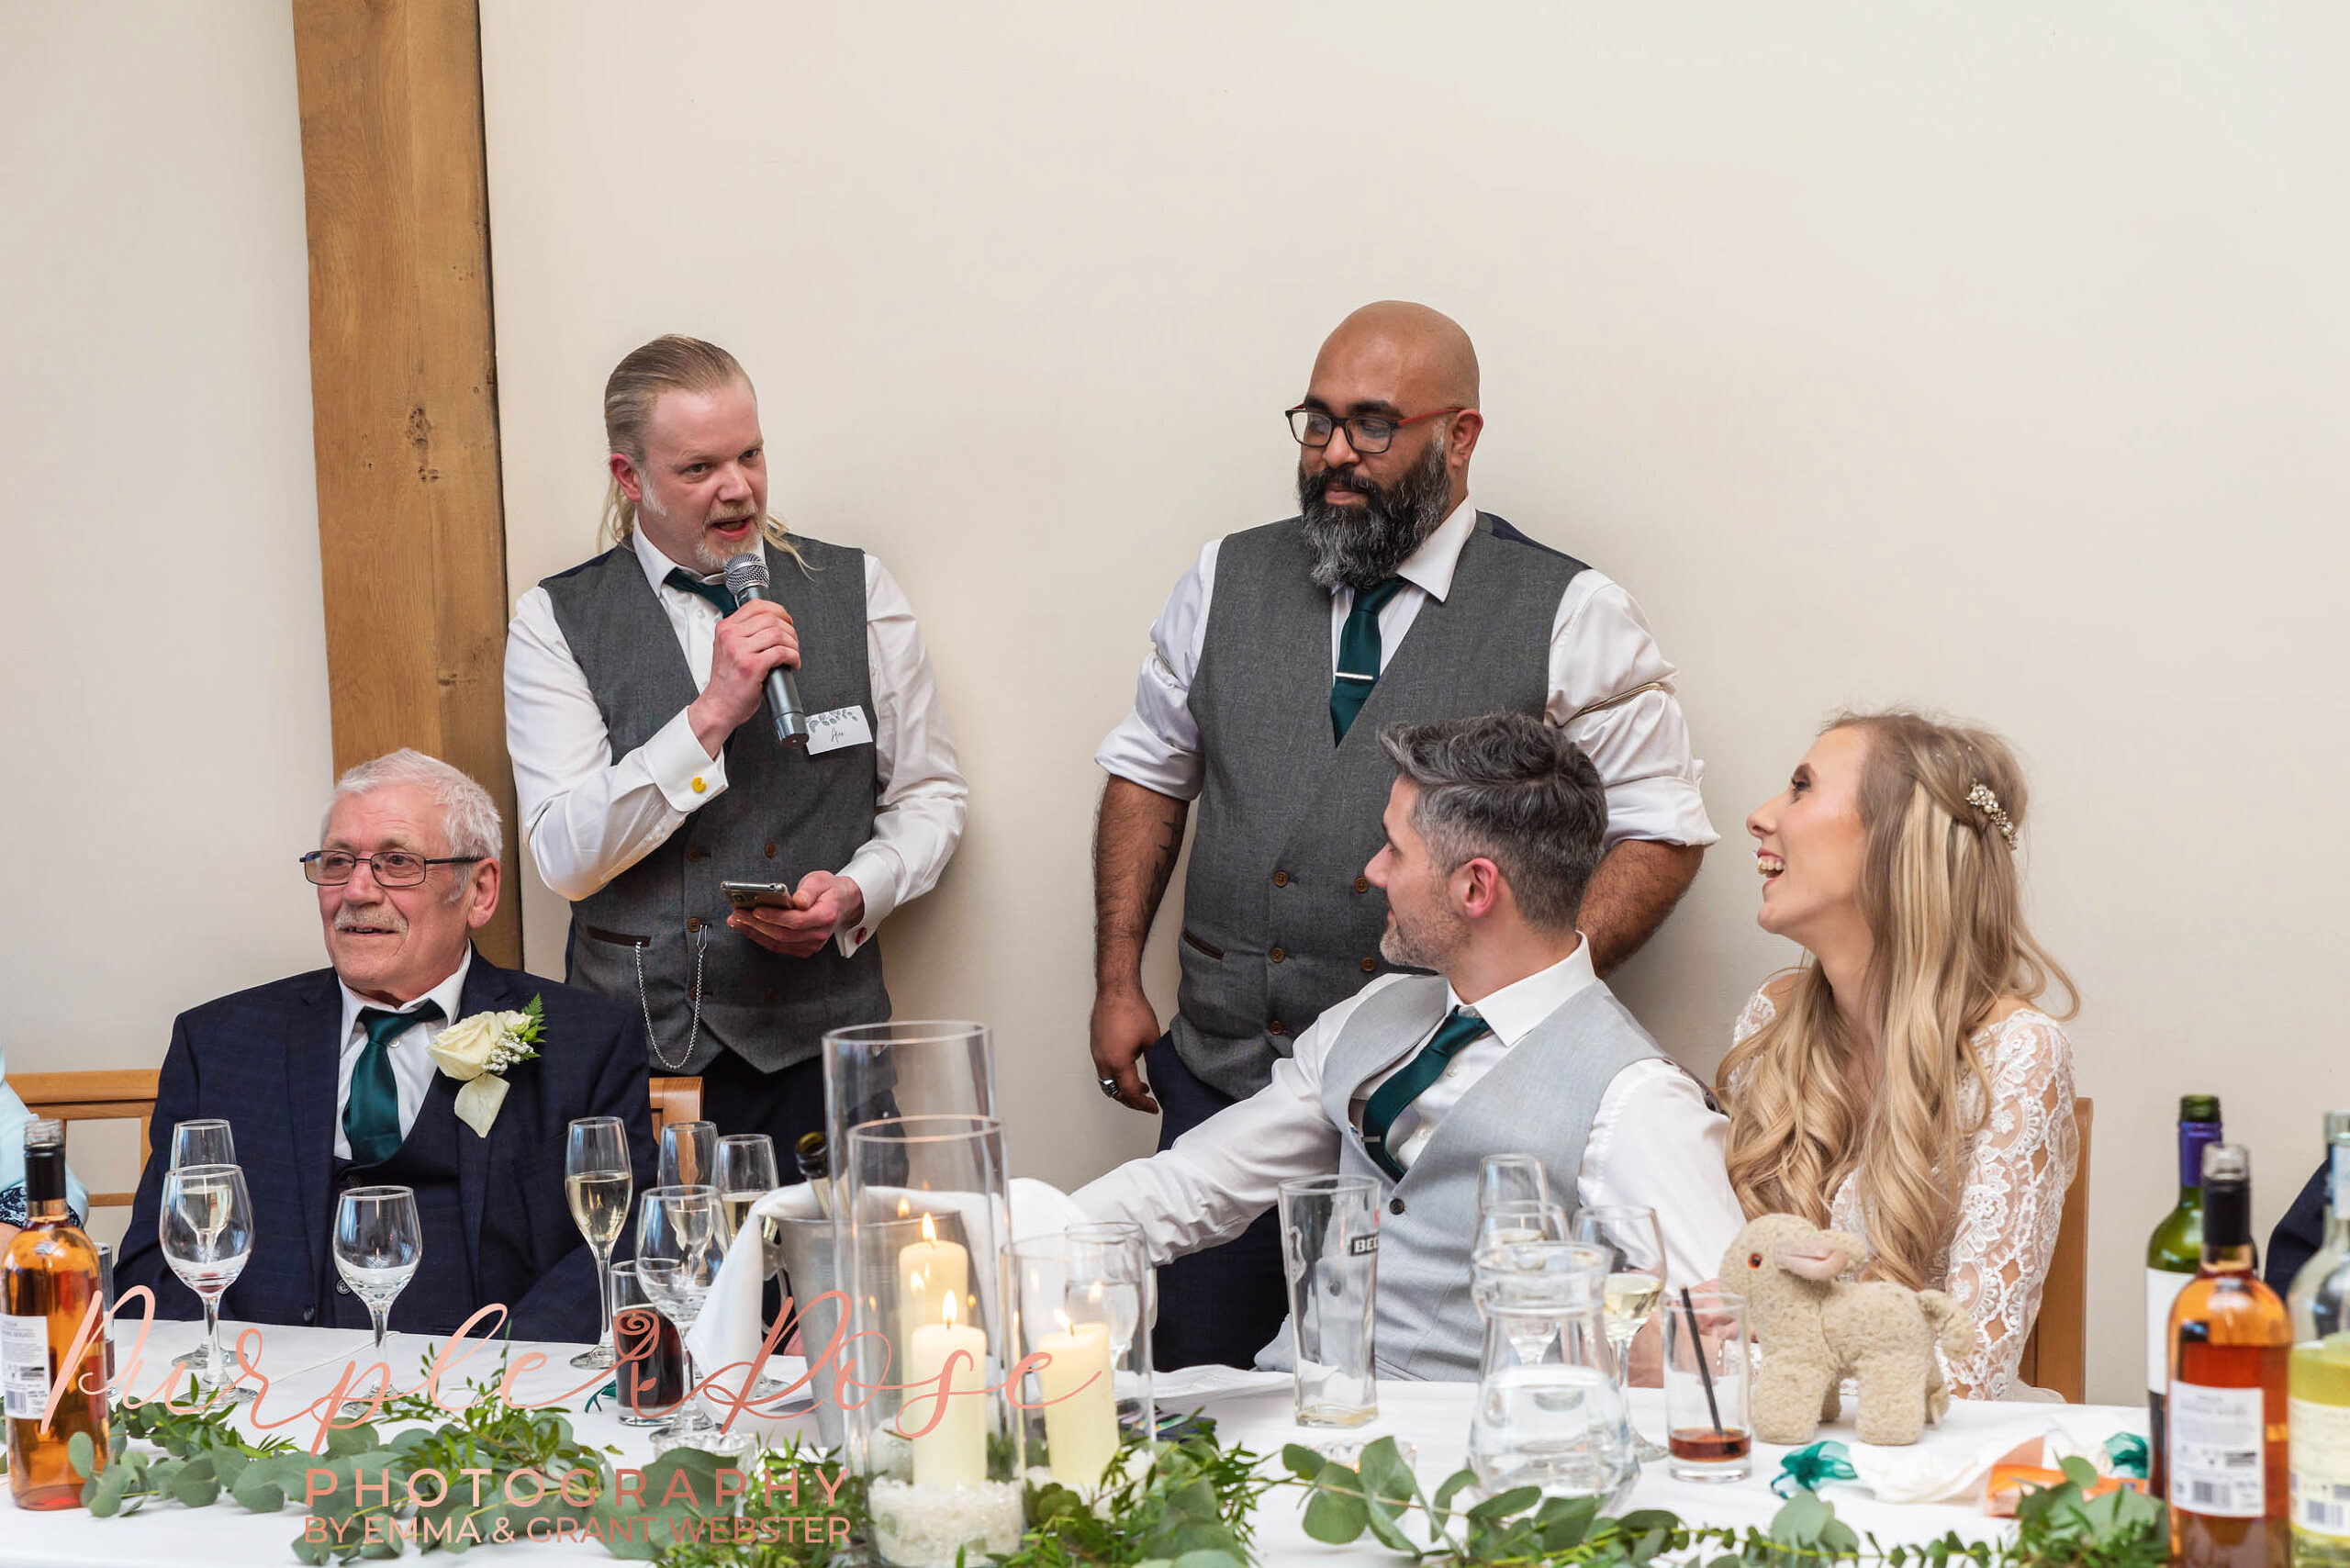 Photo of a bride and groom laughing during the speeches at their wedding in Milton Keynes